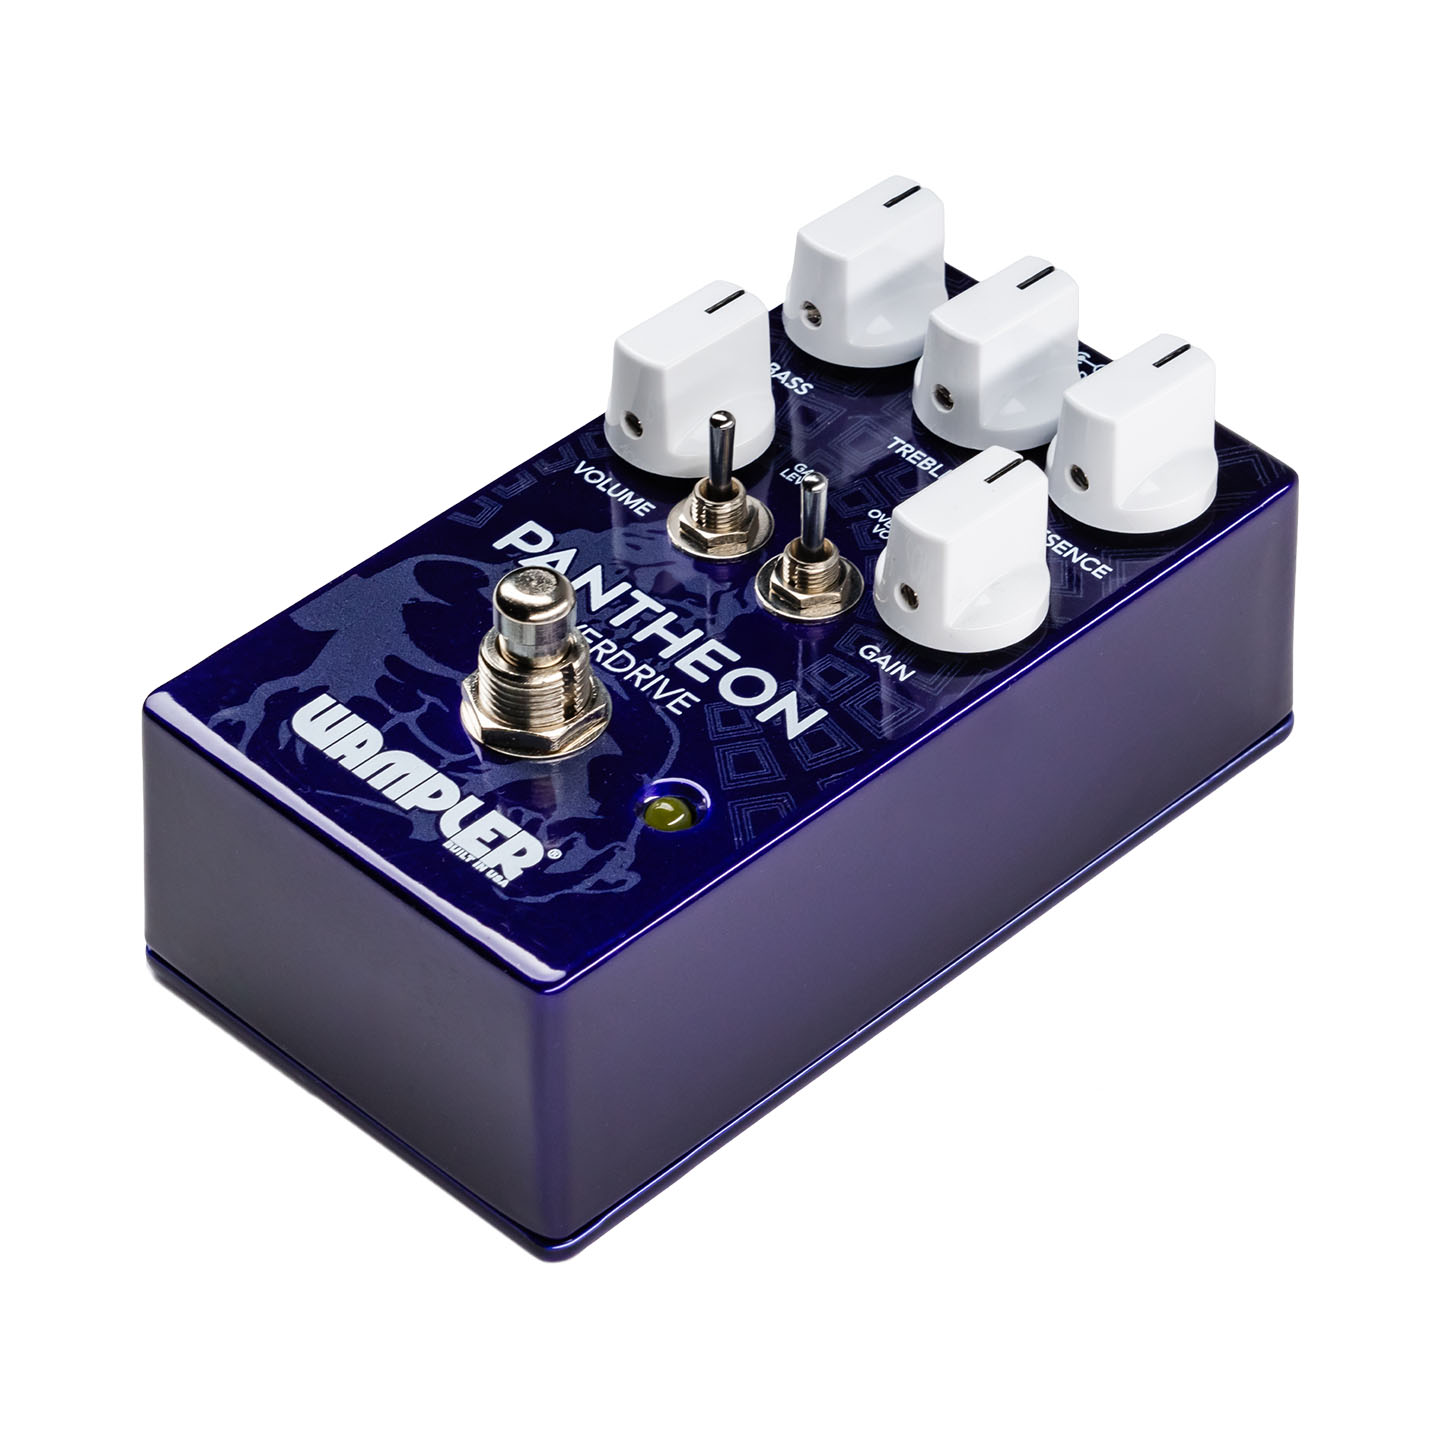 Pantheon Overdrive Pedal